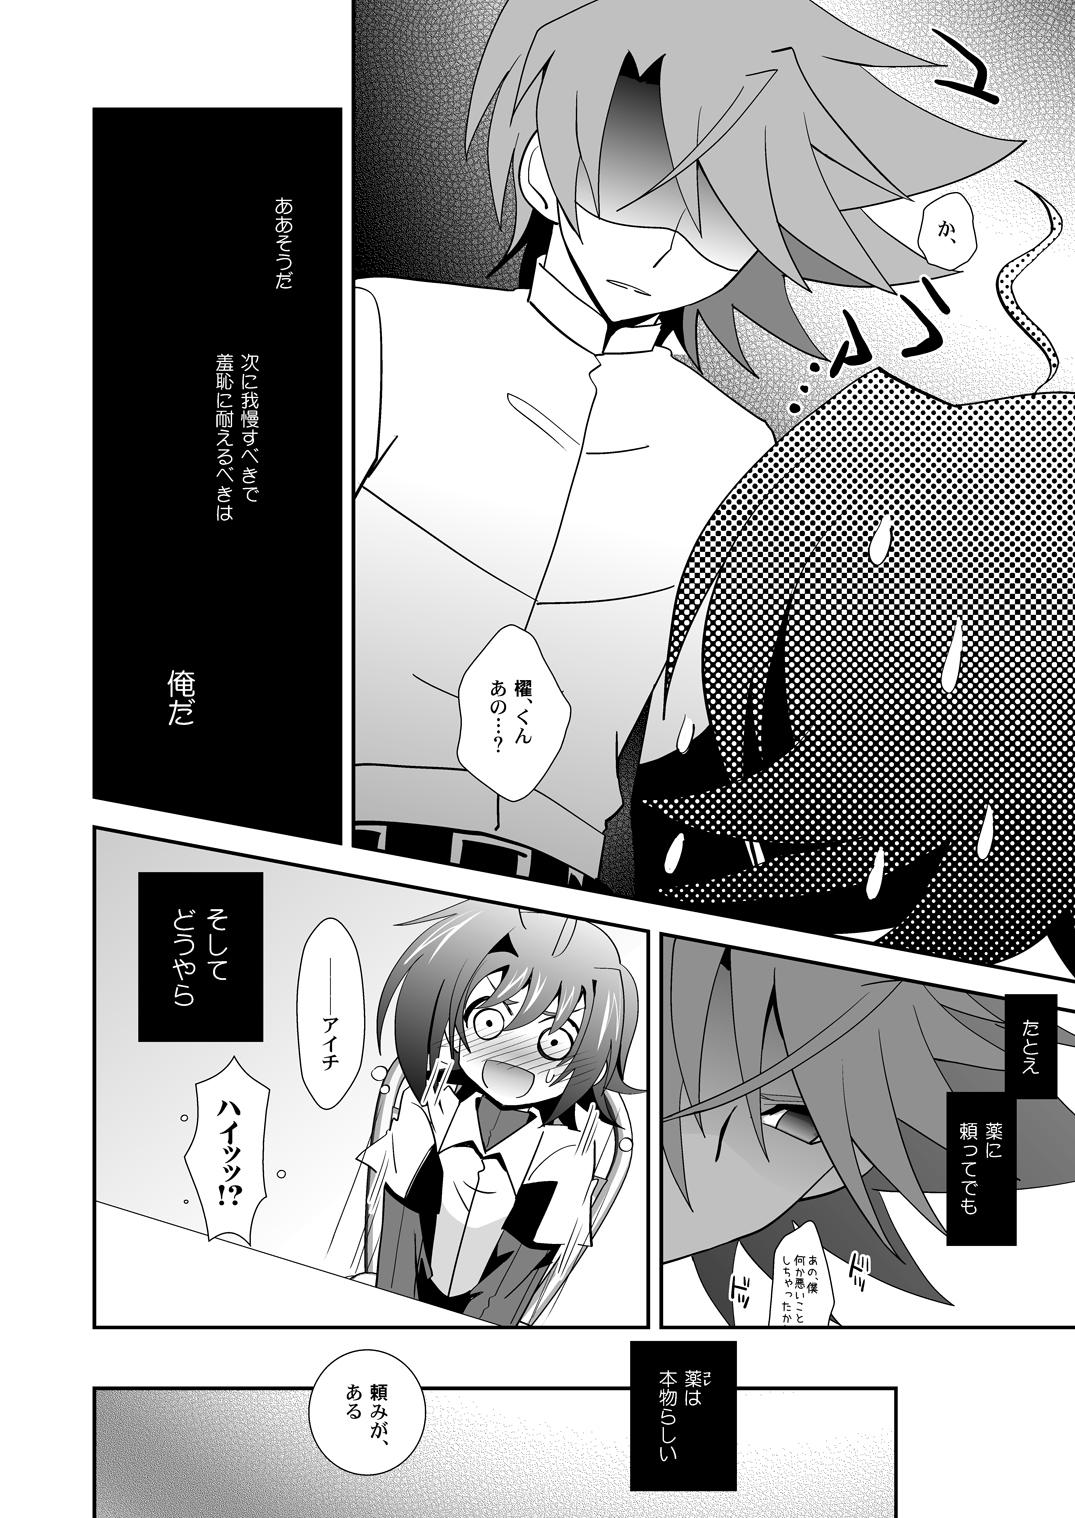 Freckles Toshiki×toxic! - Cardfight vanguard Maid - Page 11